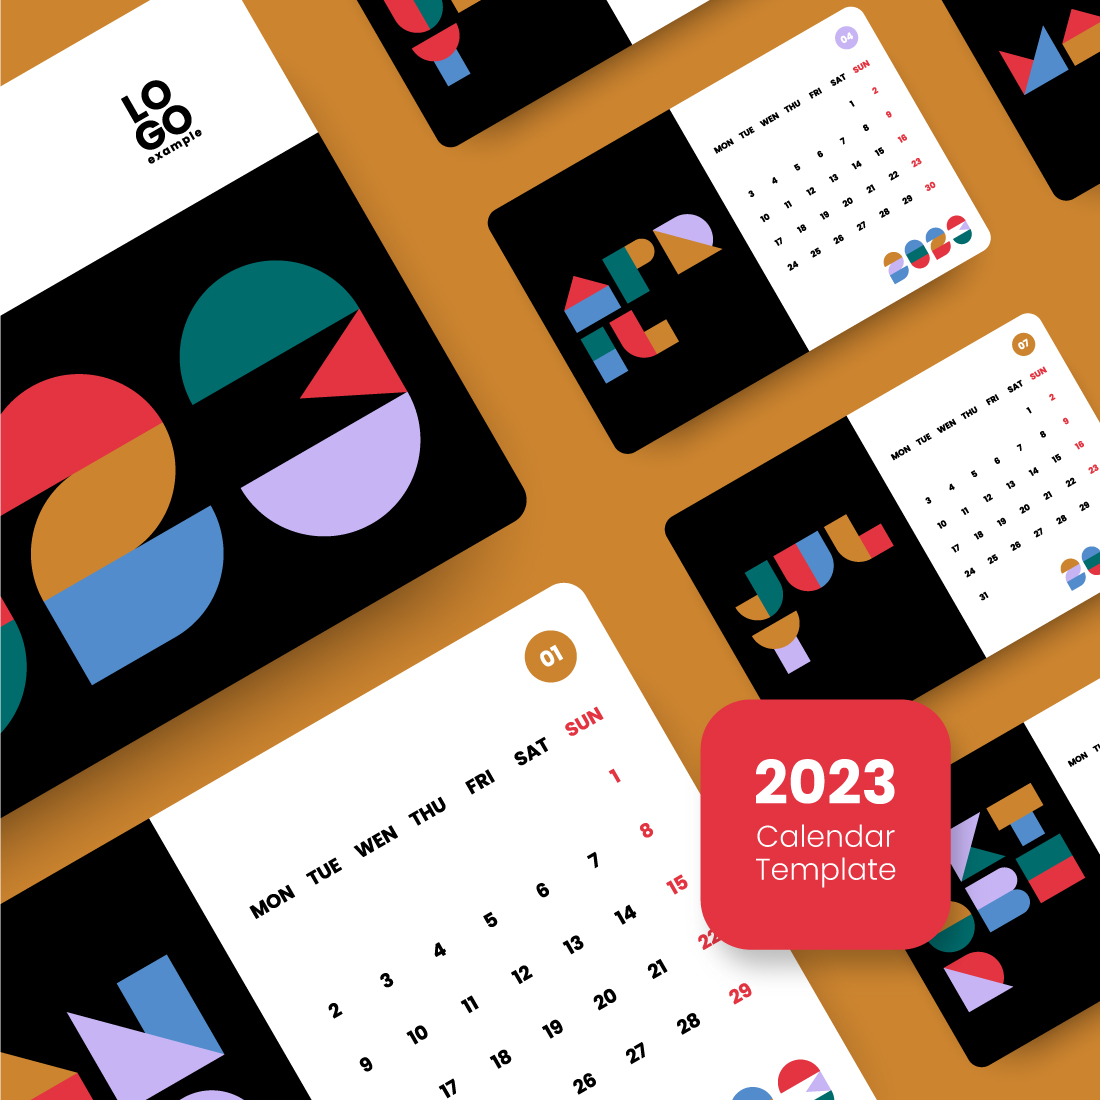 2023 Calendar Template With Typography - main image preview.